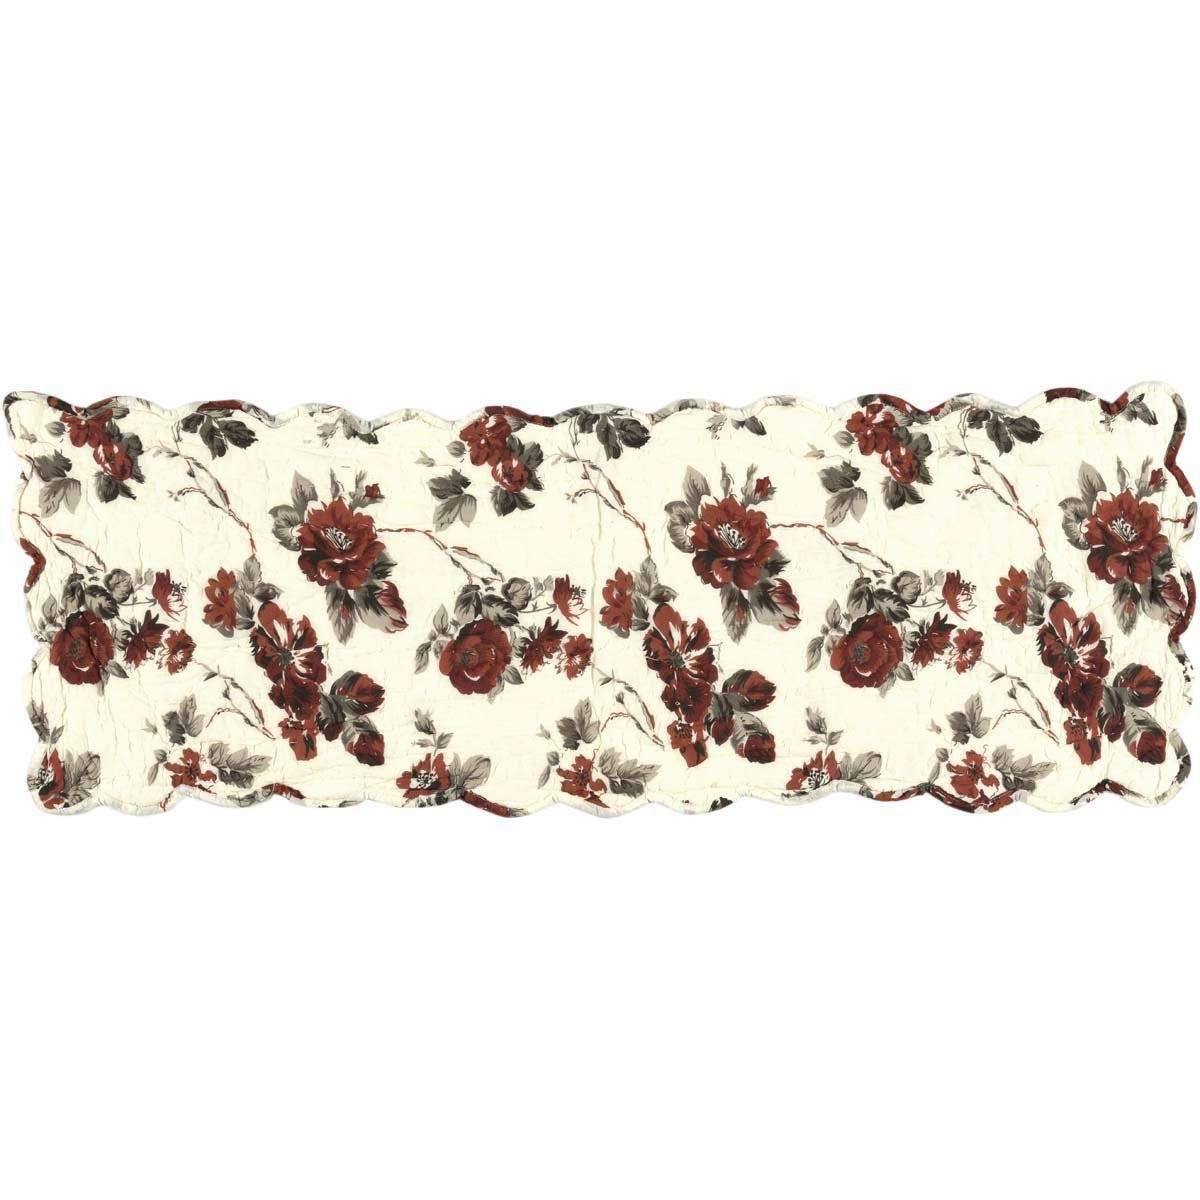 Mariell Quilted Runner 13x36 VHC Brands - The Fox Decor